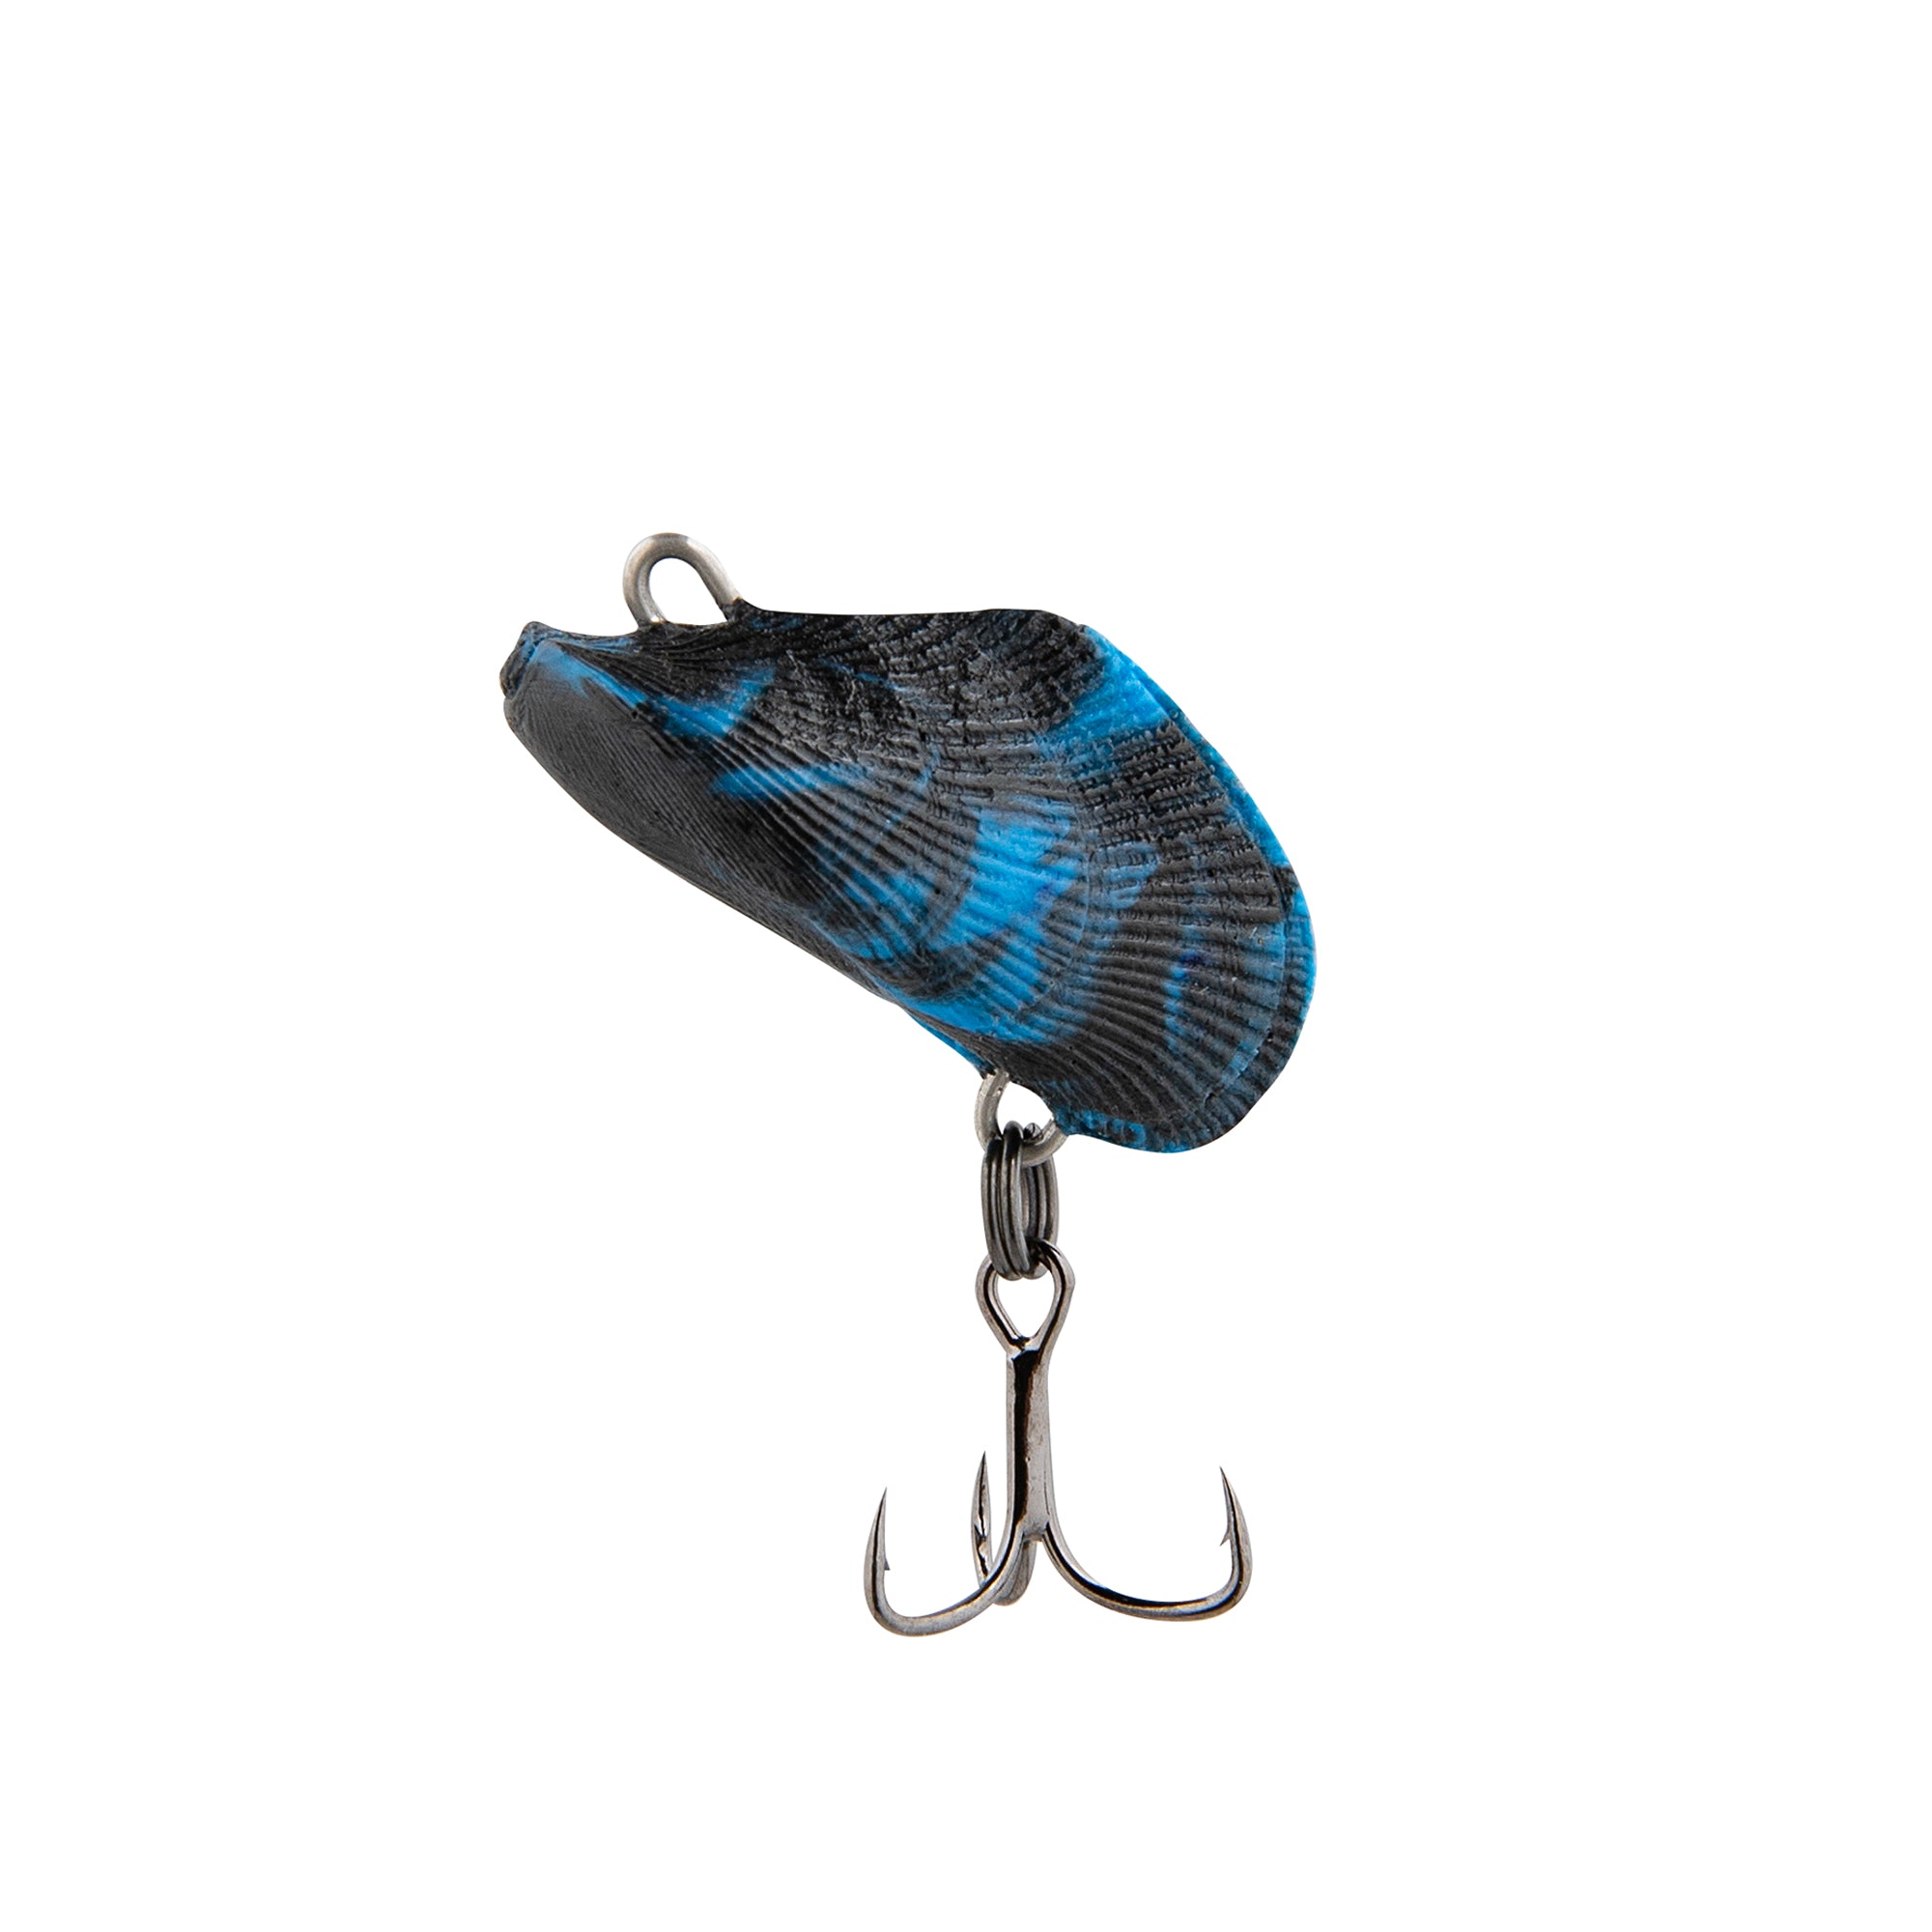 Blue Lip Baits Pygmy Mussel Heavy 2.2g - Compleat Angler Nedlands Pro Tackle